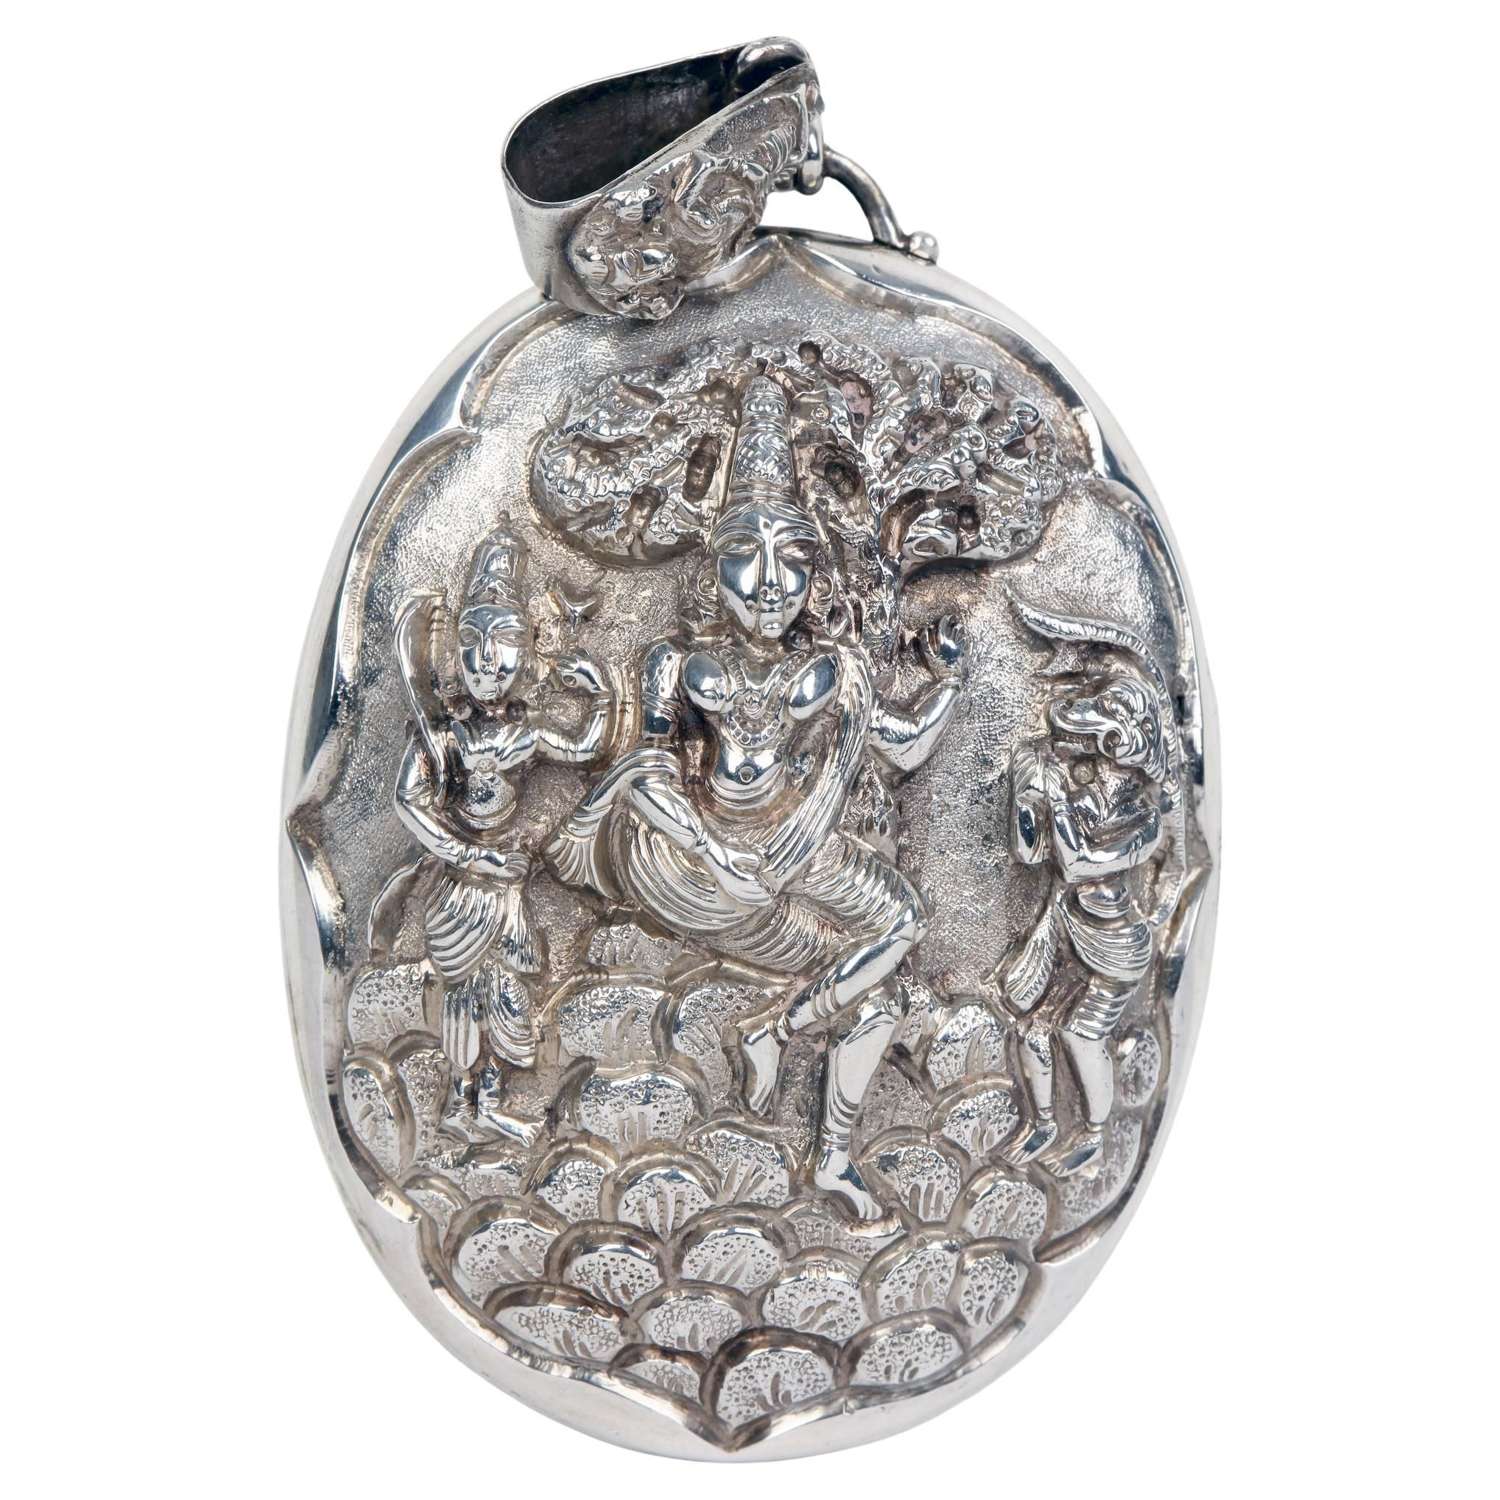 Anglo Indian Fine Large Silver Embossed Deity Oval Locket Dated 1880